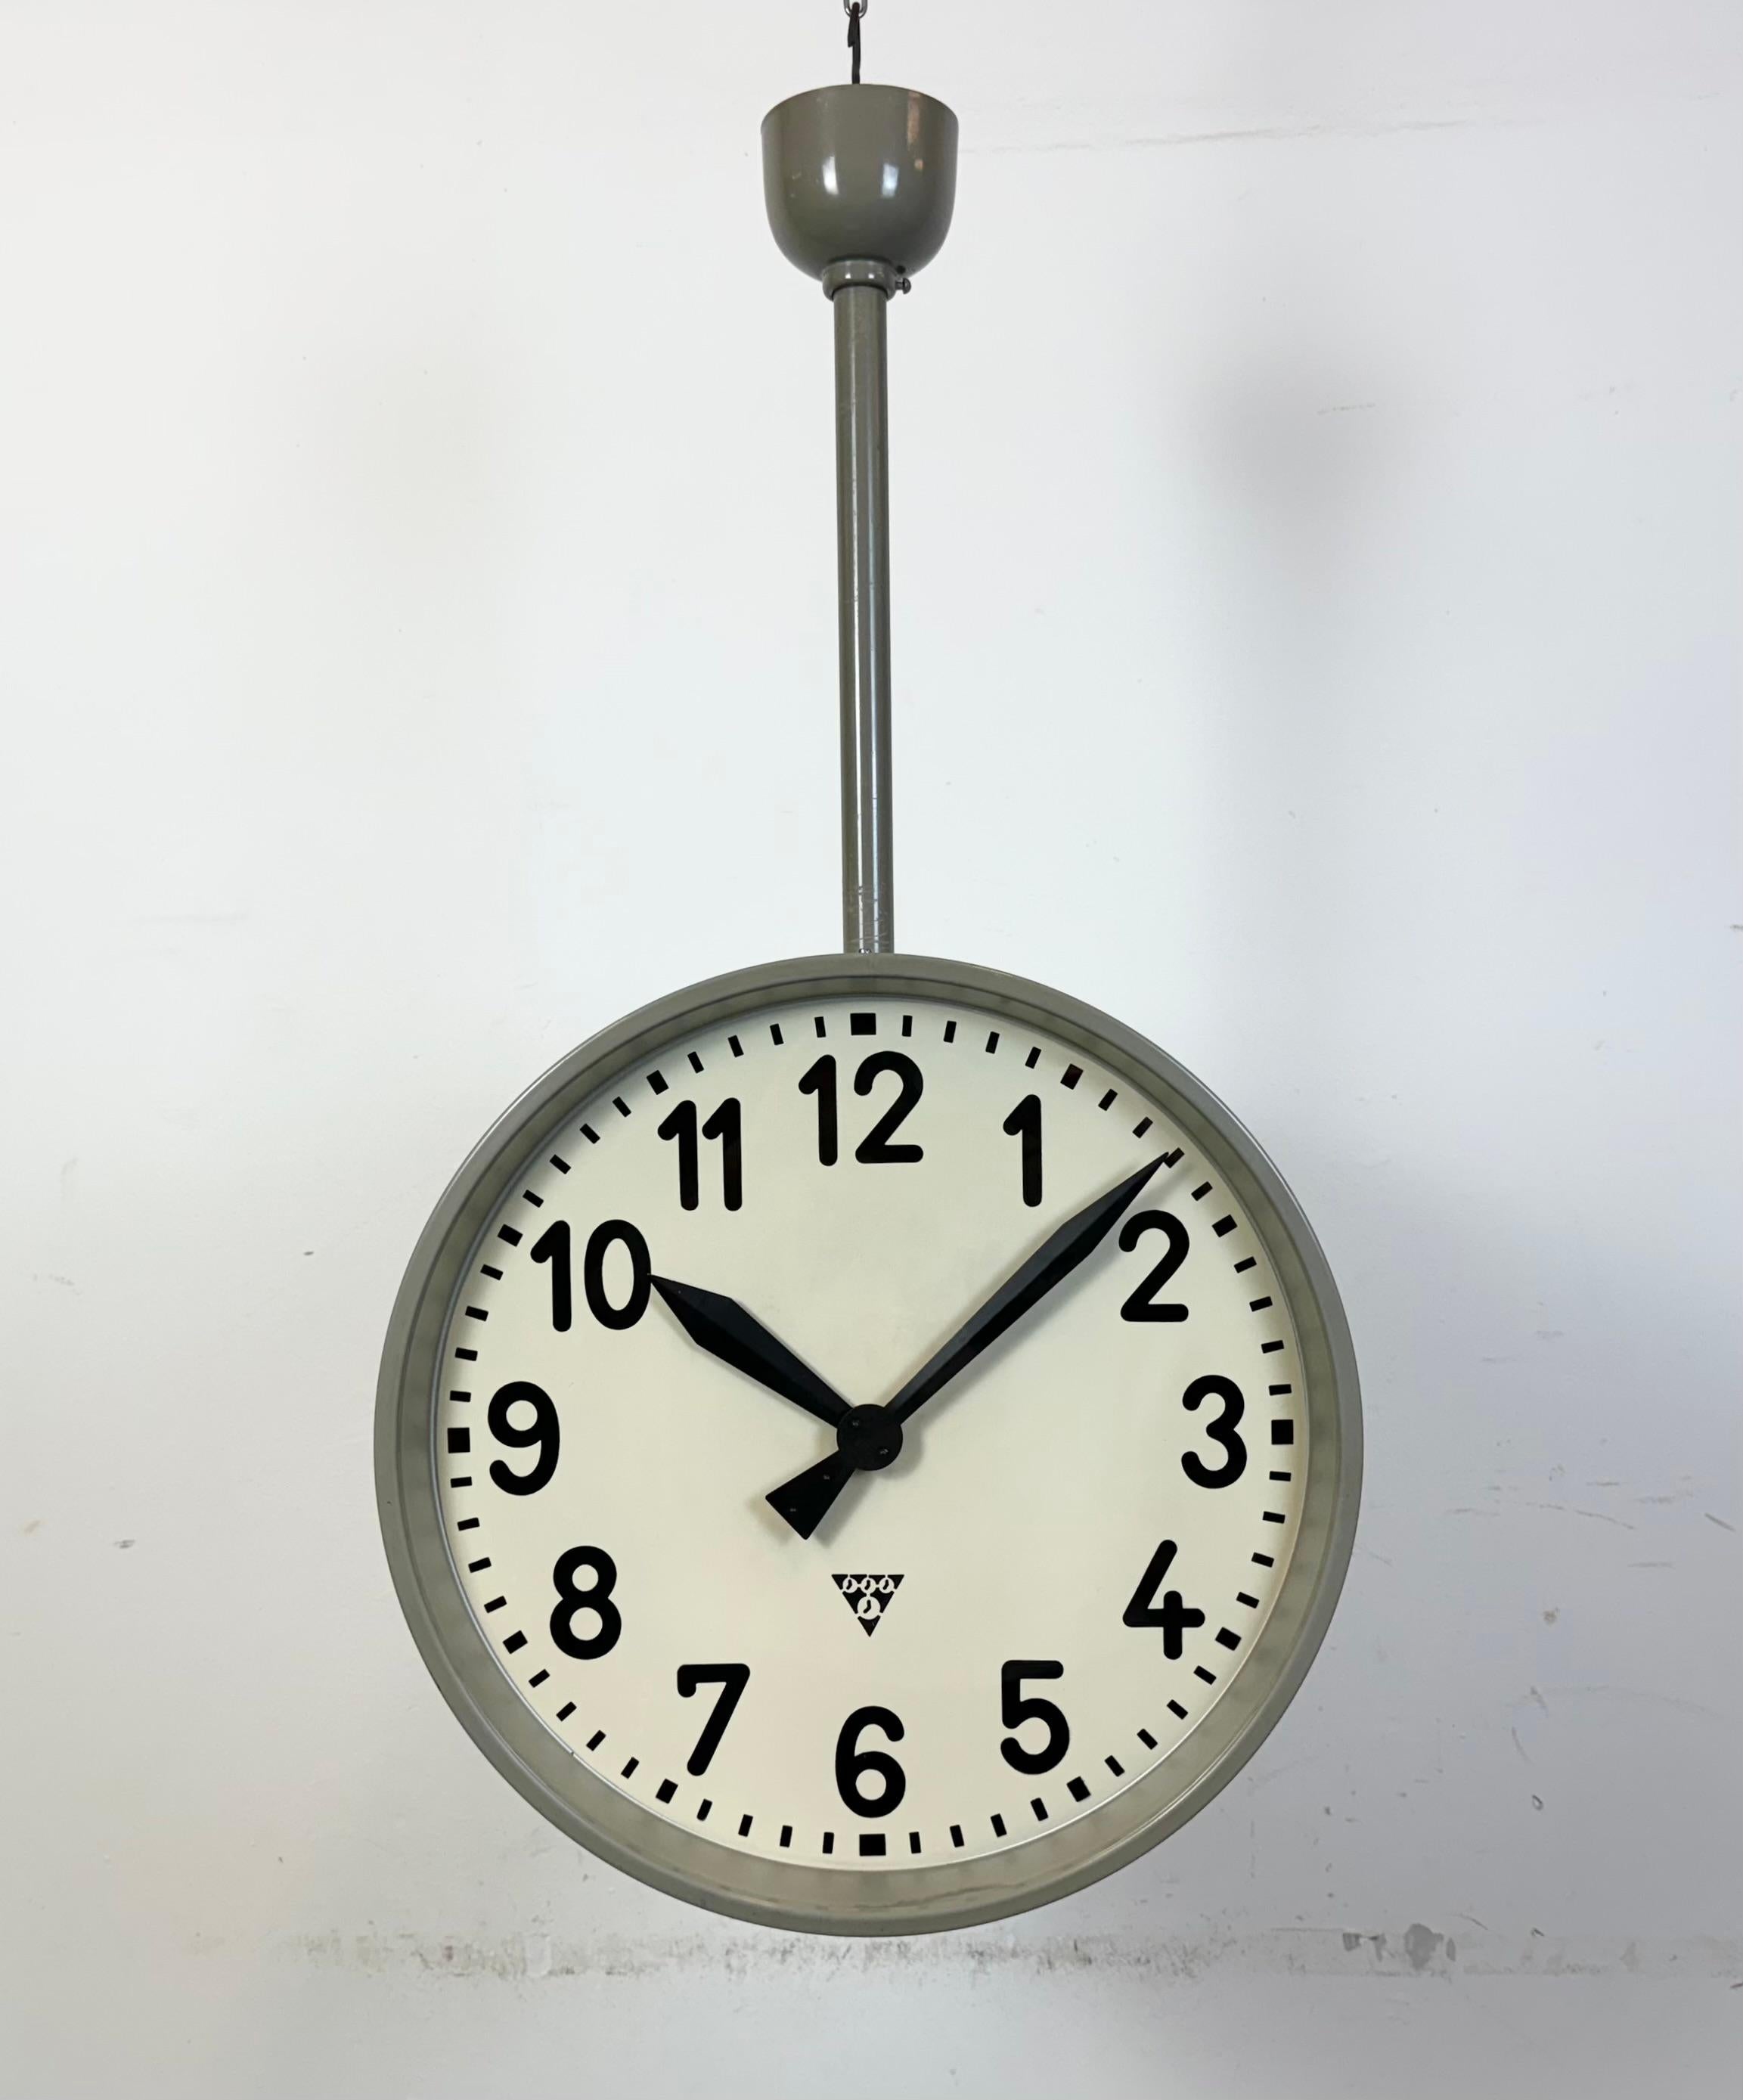 This large double sided railway or factory clock was produced by Pragotron, in former Czechoslovakia, during the 1950s. The piece features a grey hammer paint metal body and a clear glass cover. The clock has been converted into a battery-powered